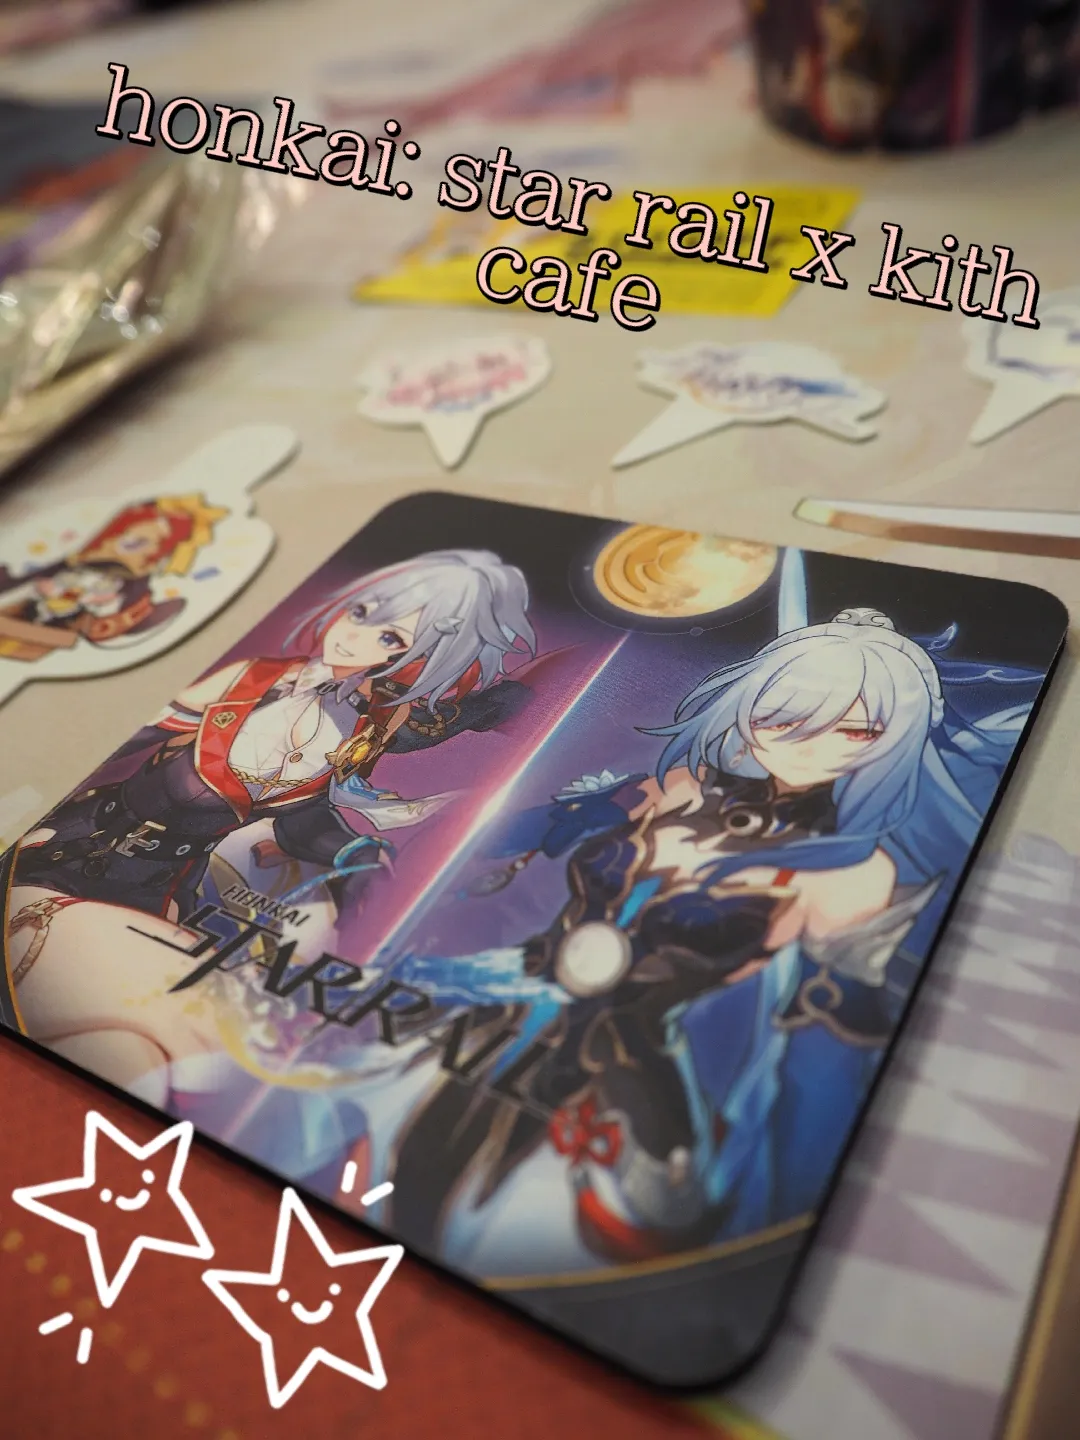 Honkai: Star Rail daily check-in! Start your check ins and don't